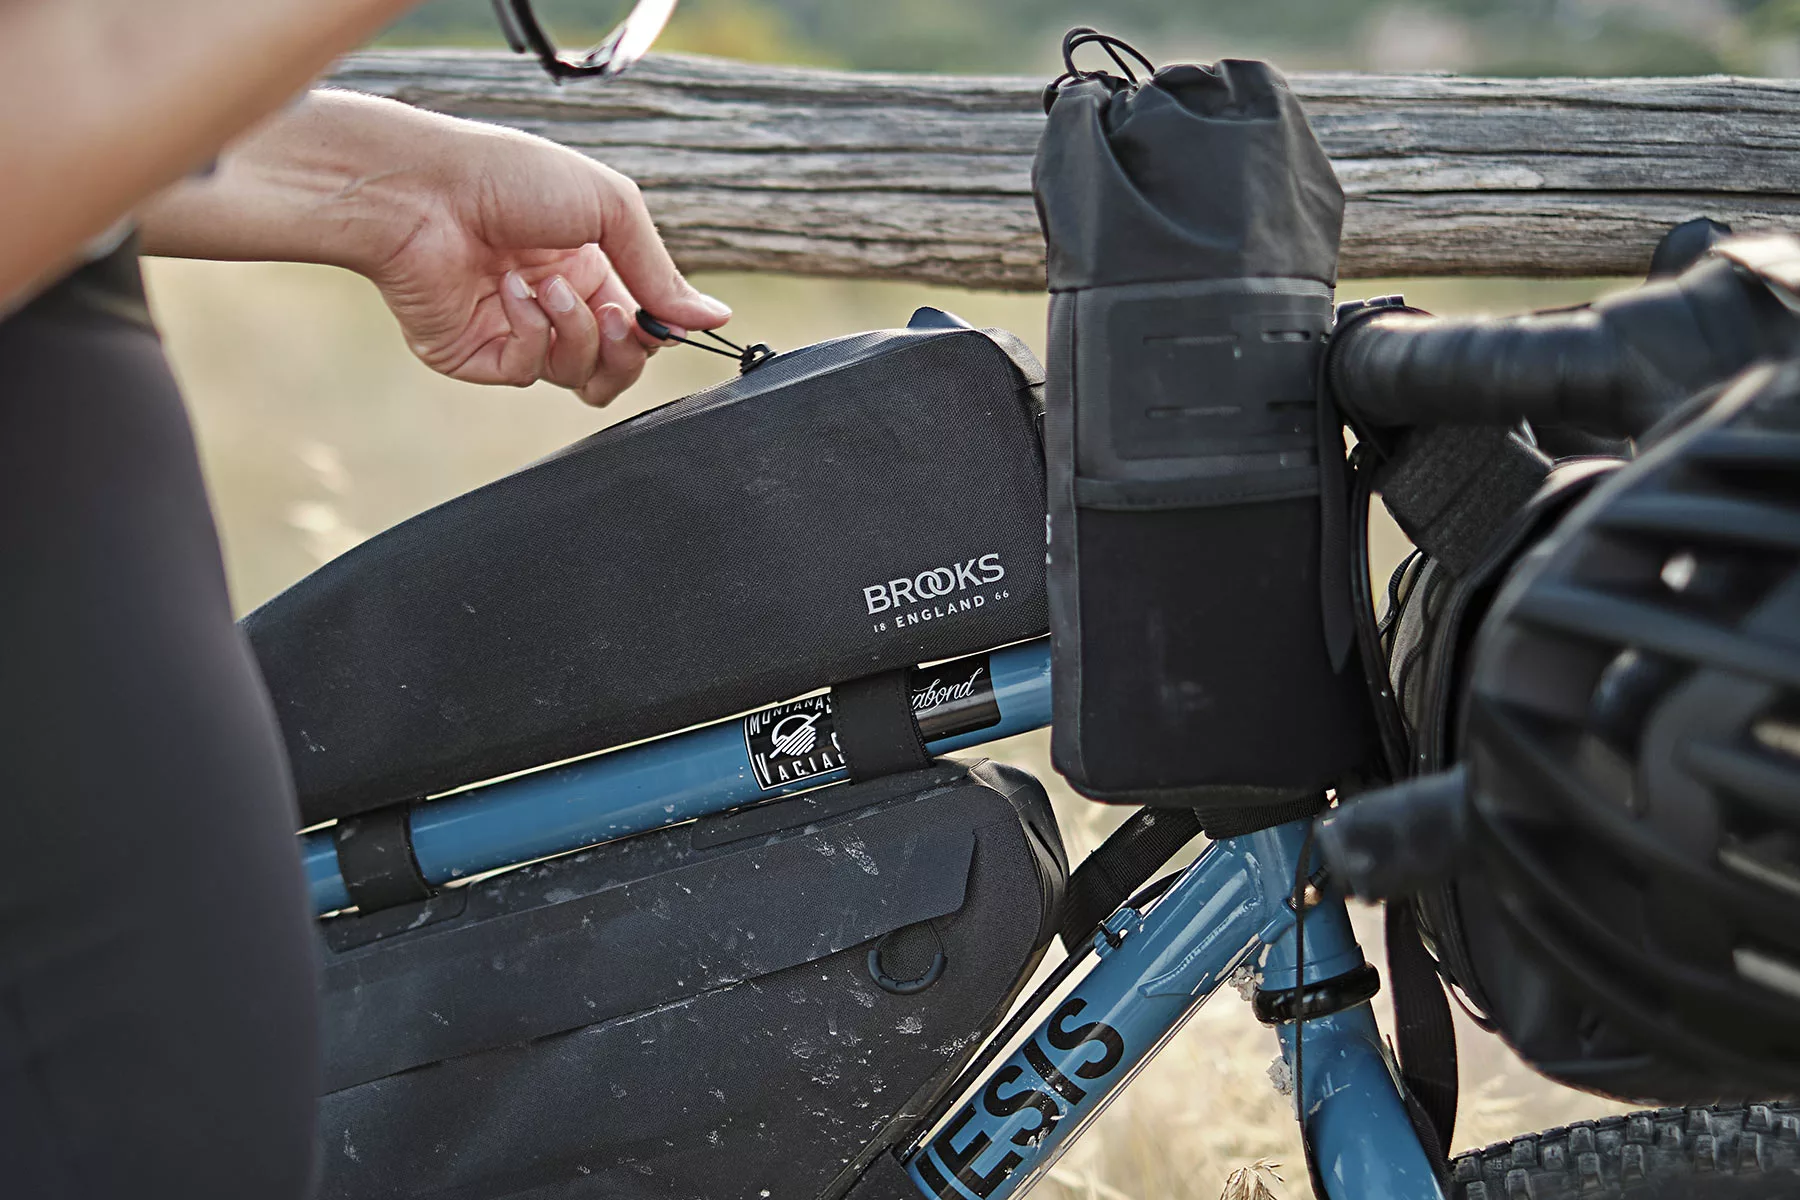 Brooks Scape expands bikepacking bags with longer sizes, bolt-on & new look